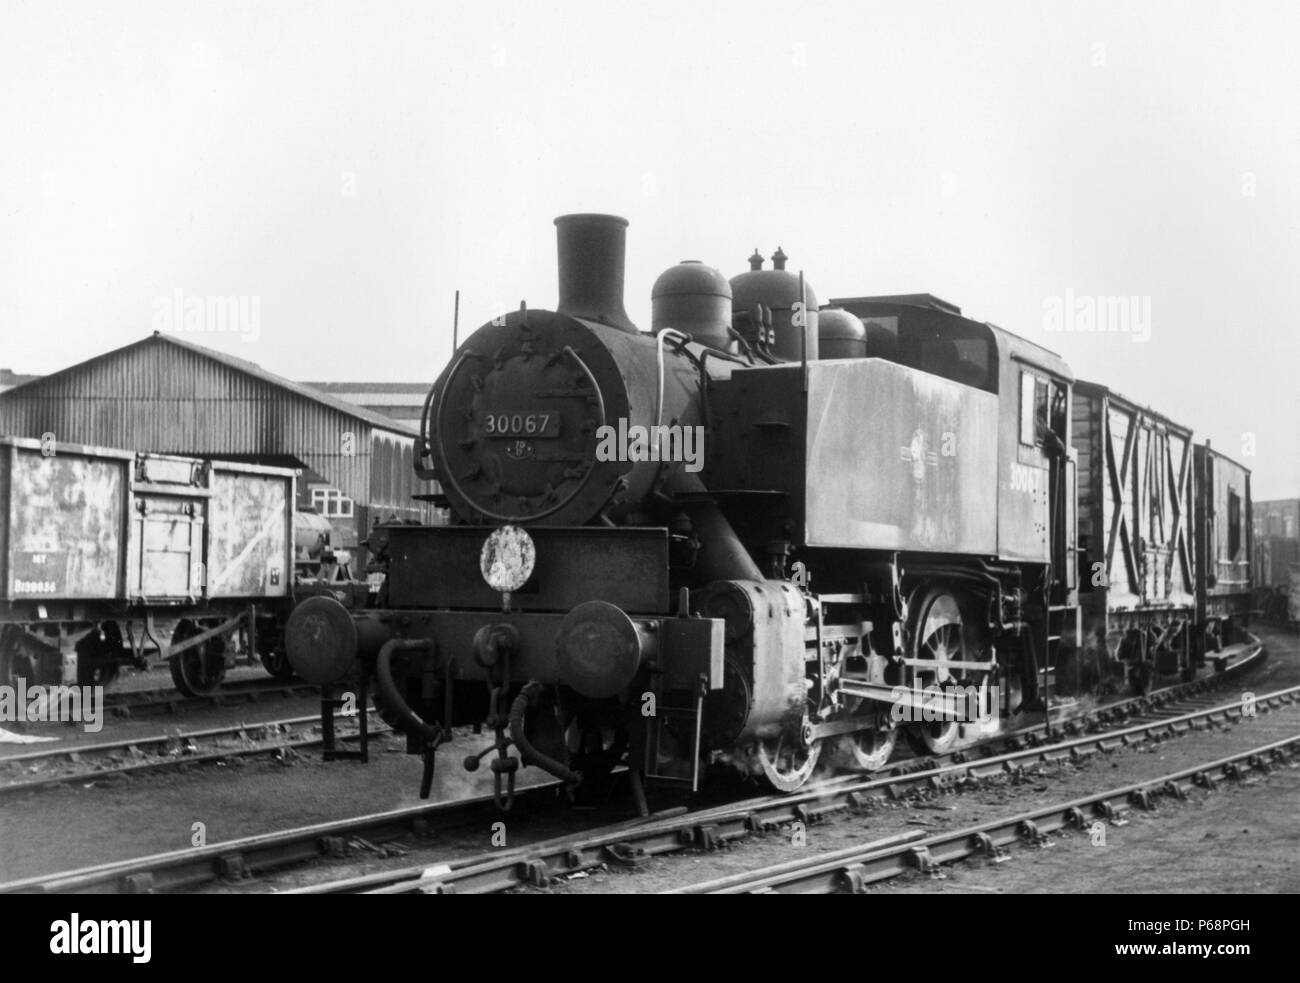 These United States Army Transportation Corps 0-6-0Ts were one of the stalwart design of World War 2. The cessation of hostilities led to them being w Stock Photo